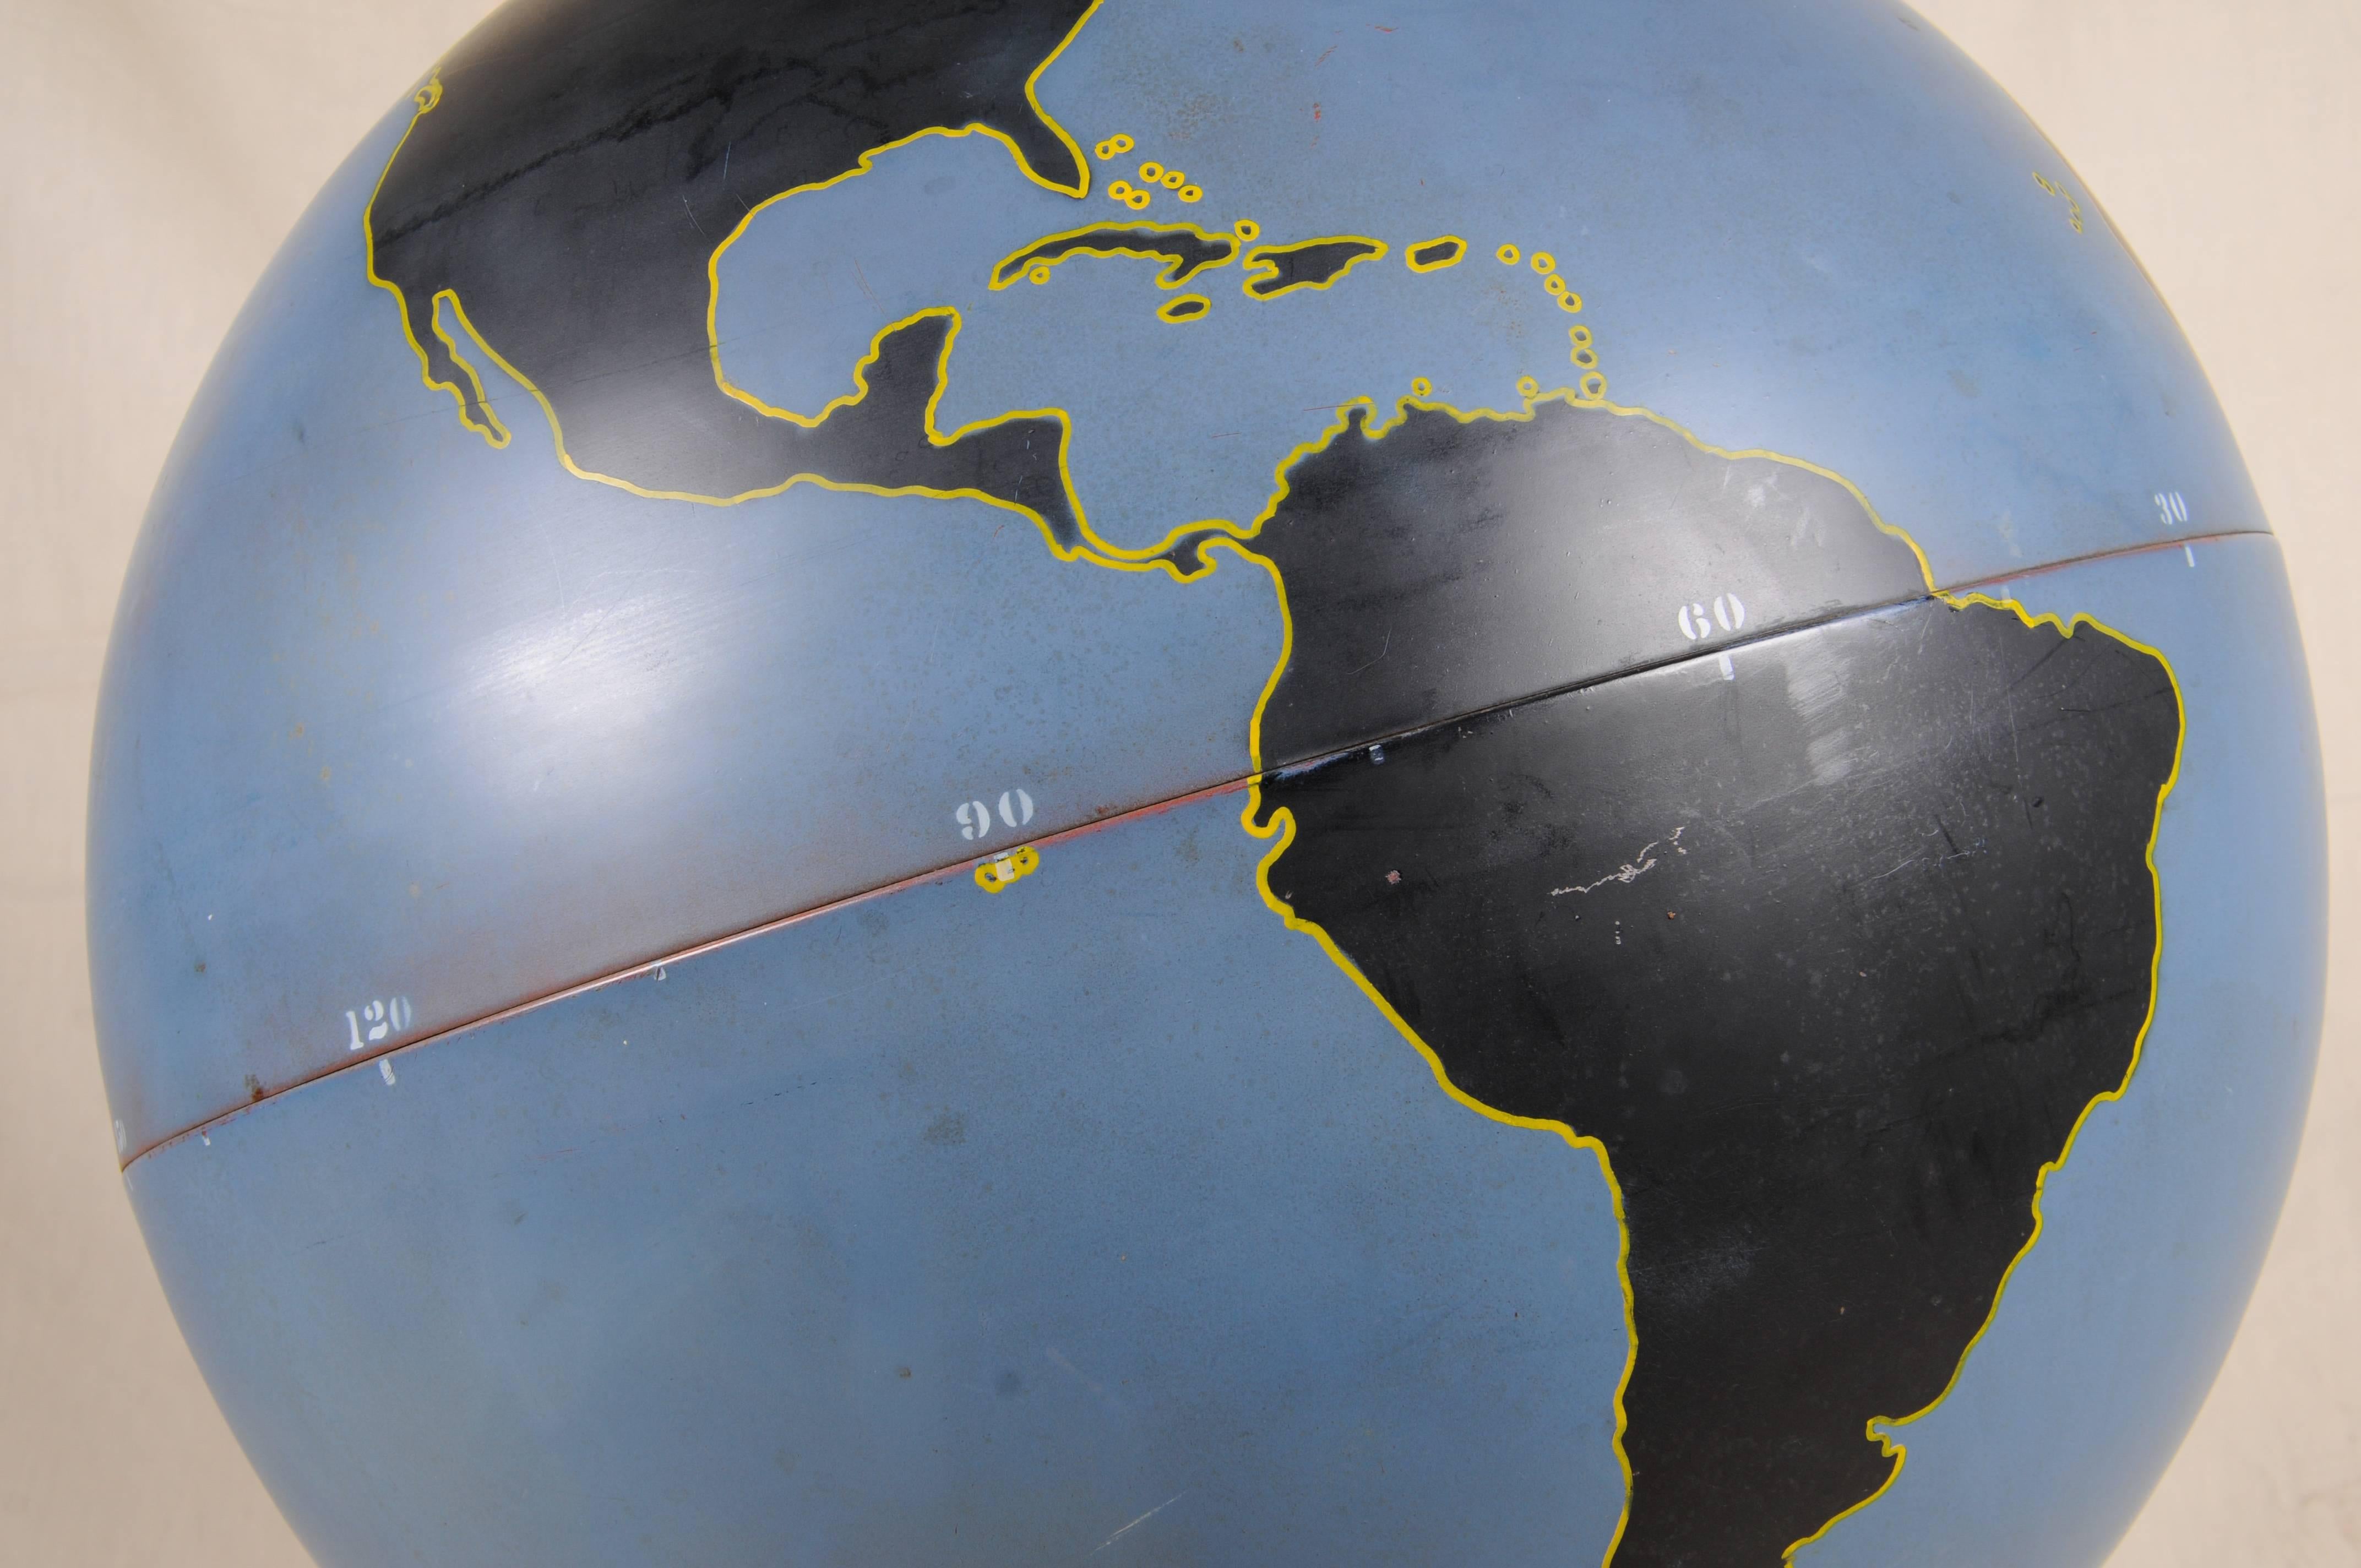 1940s Denoyer-Geppert military aviation teaching globe.
Large steel orb of two connected halves. Land masses in black with yellow outlines; oceans in a deep blue (appropriately). 
Signed with metal tag on the column.

Supported by precision